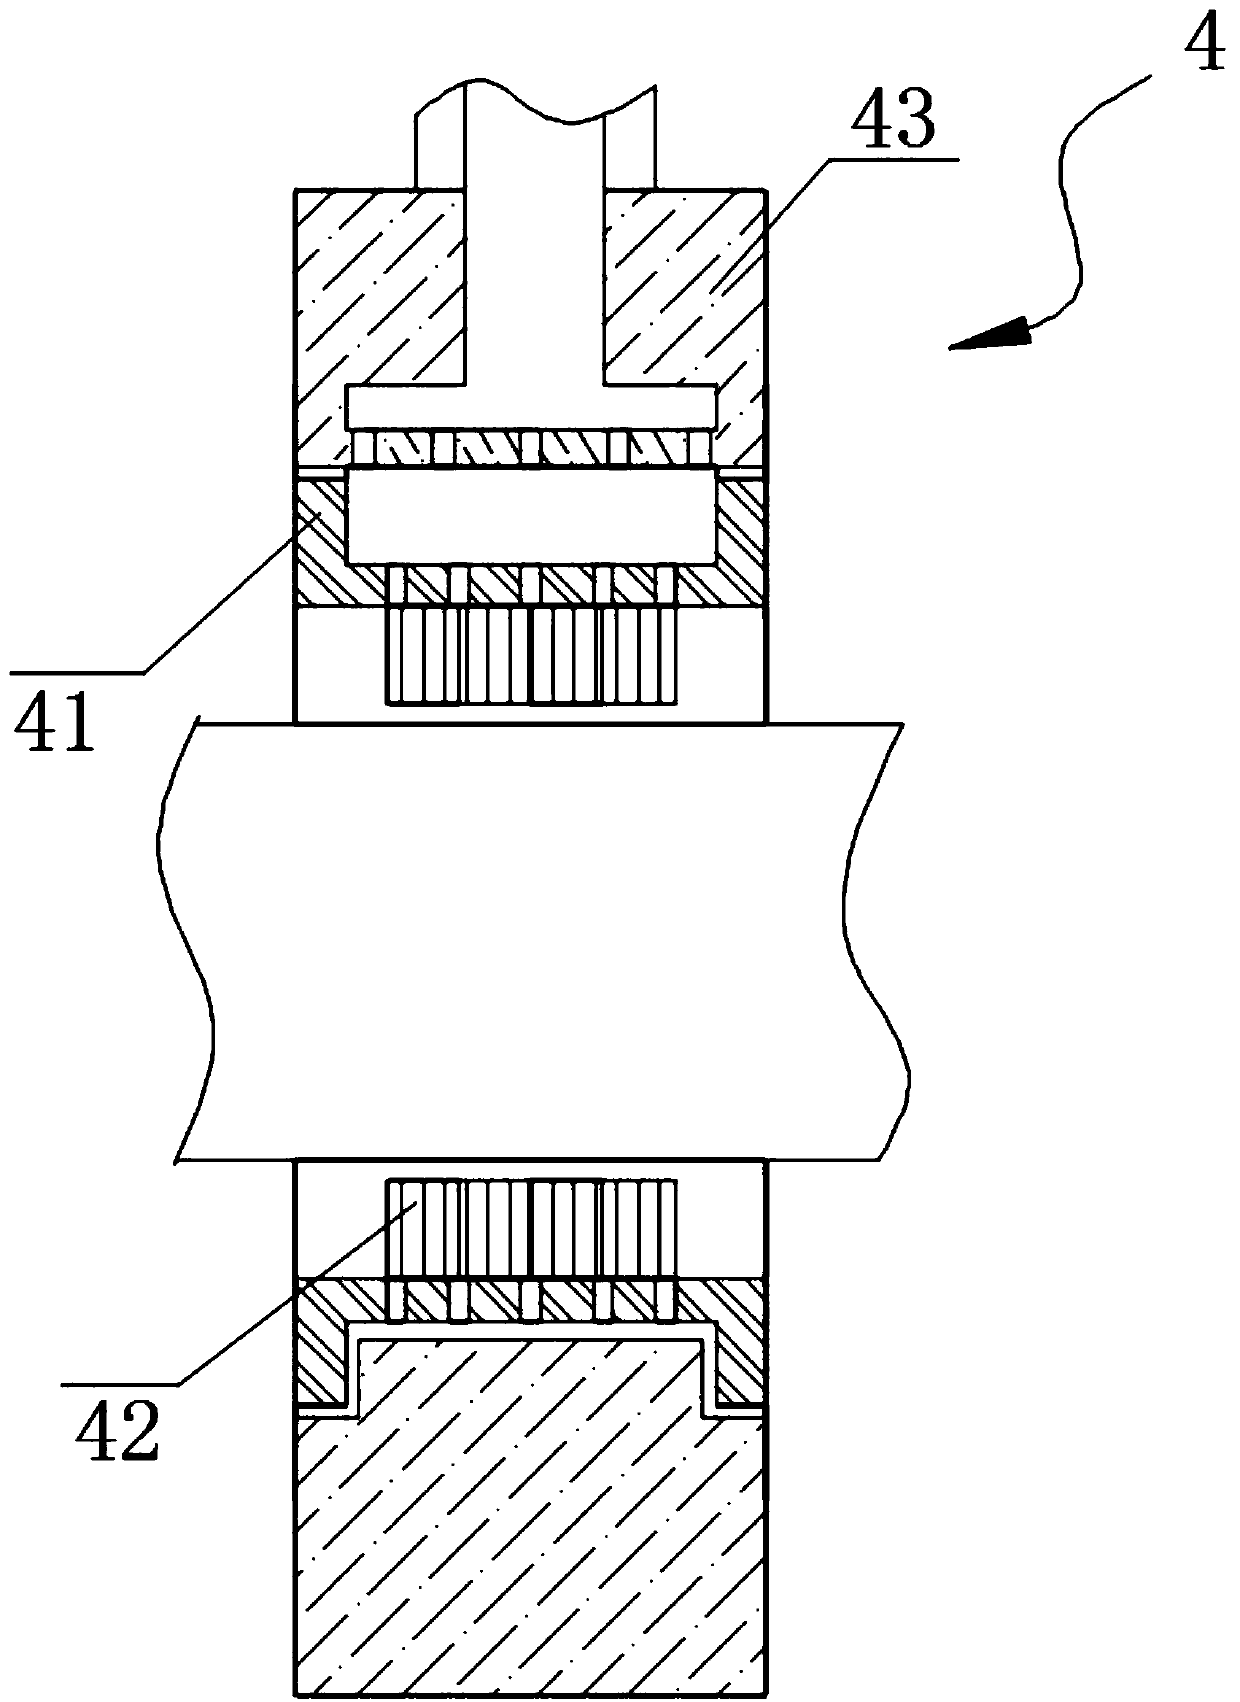 Auxiliary material filling device for cable